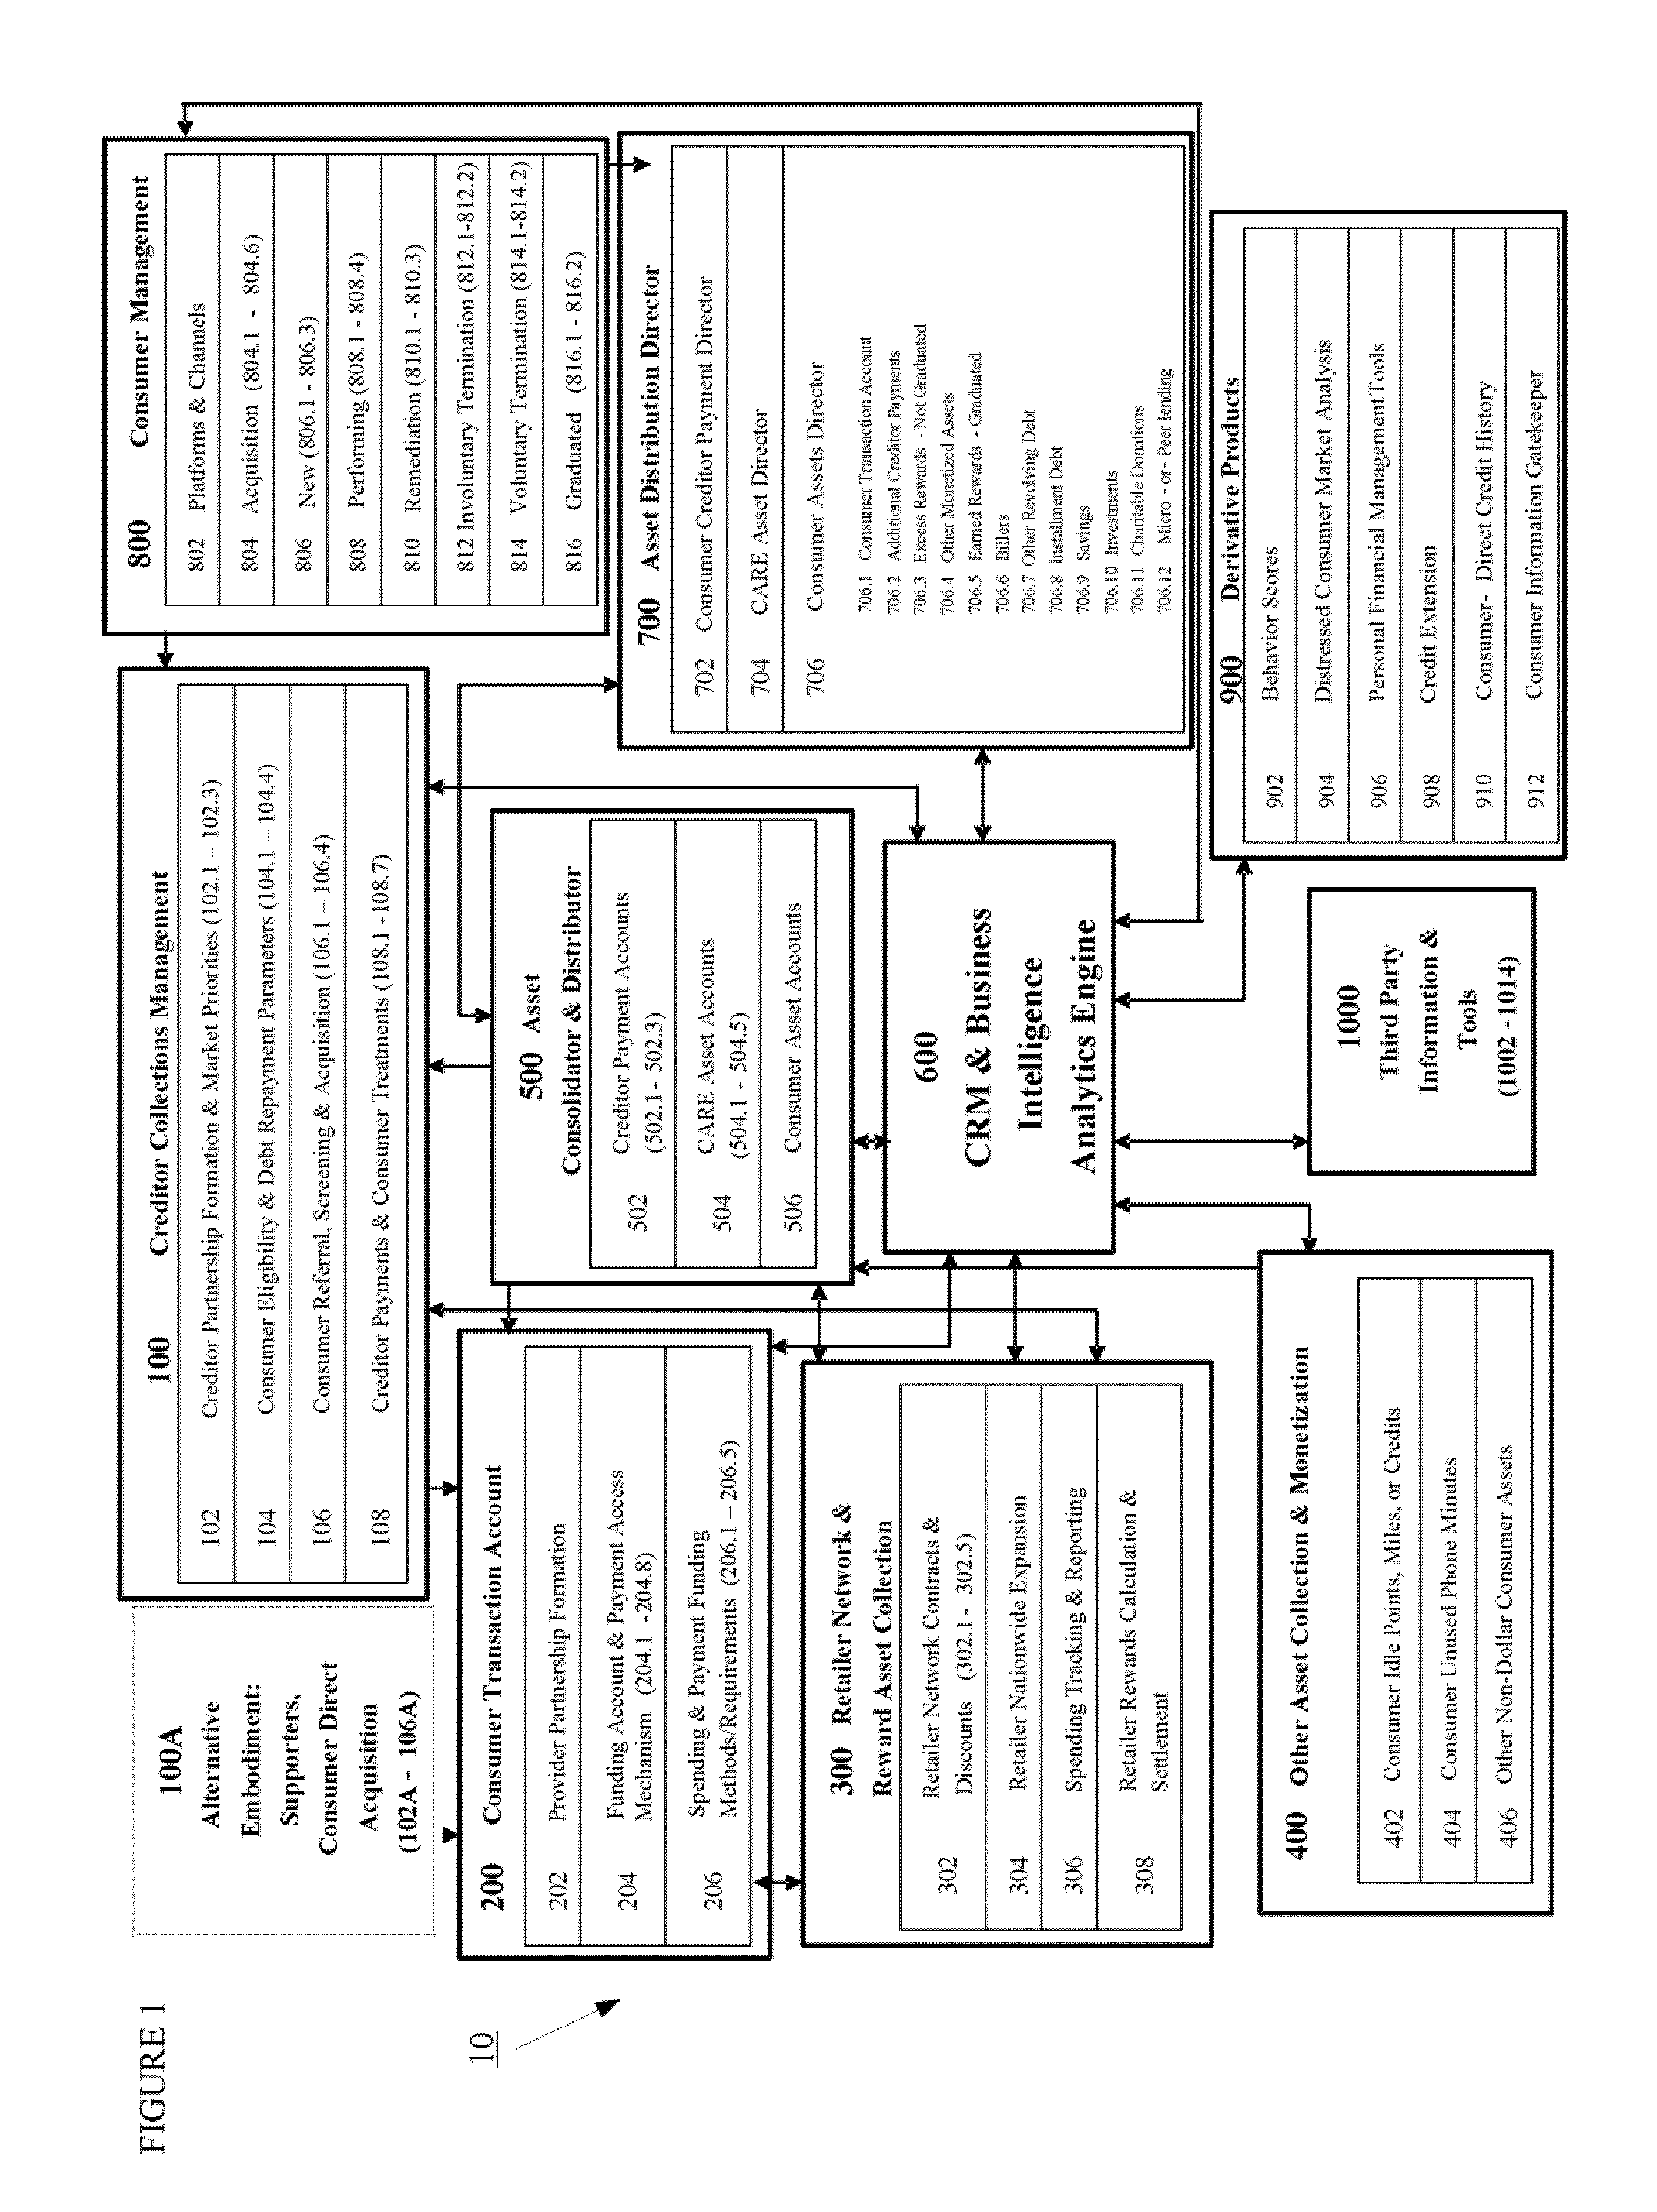 System and method for facilitating debt reduction